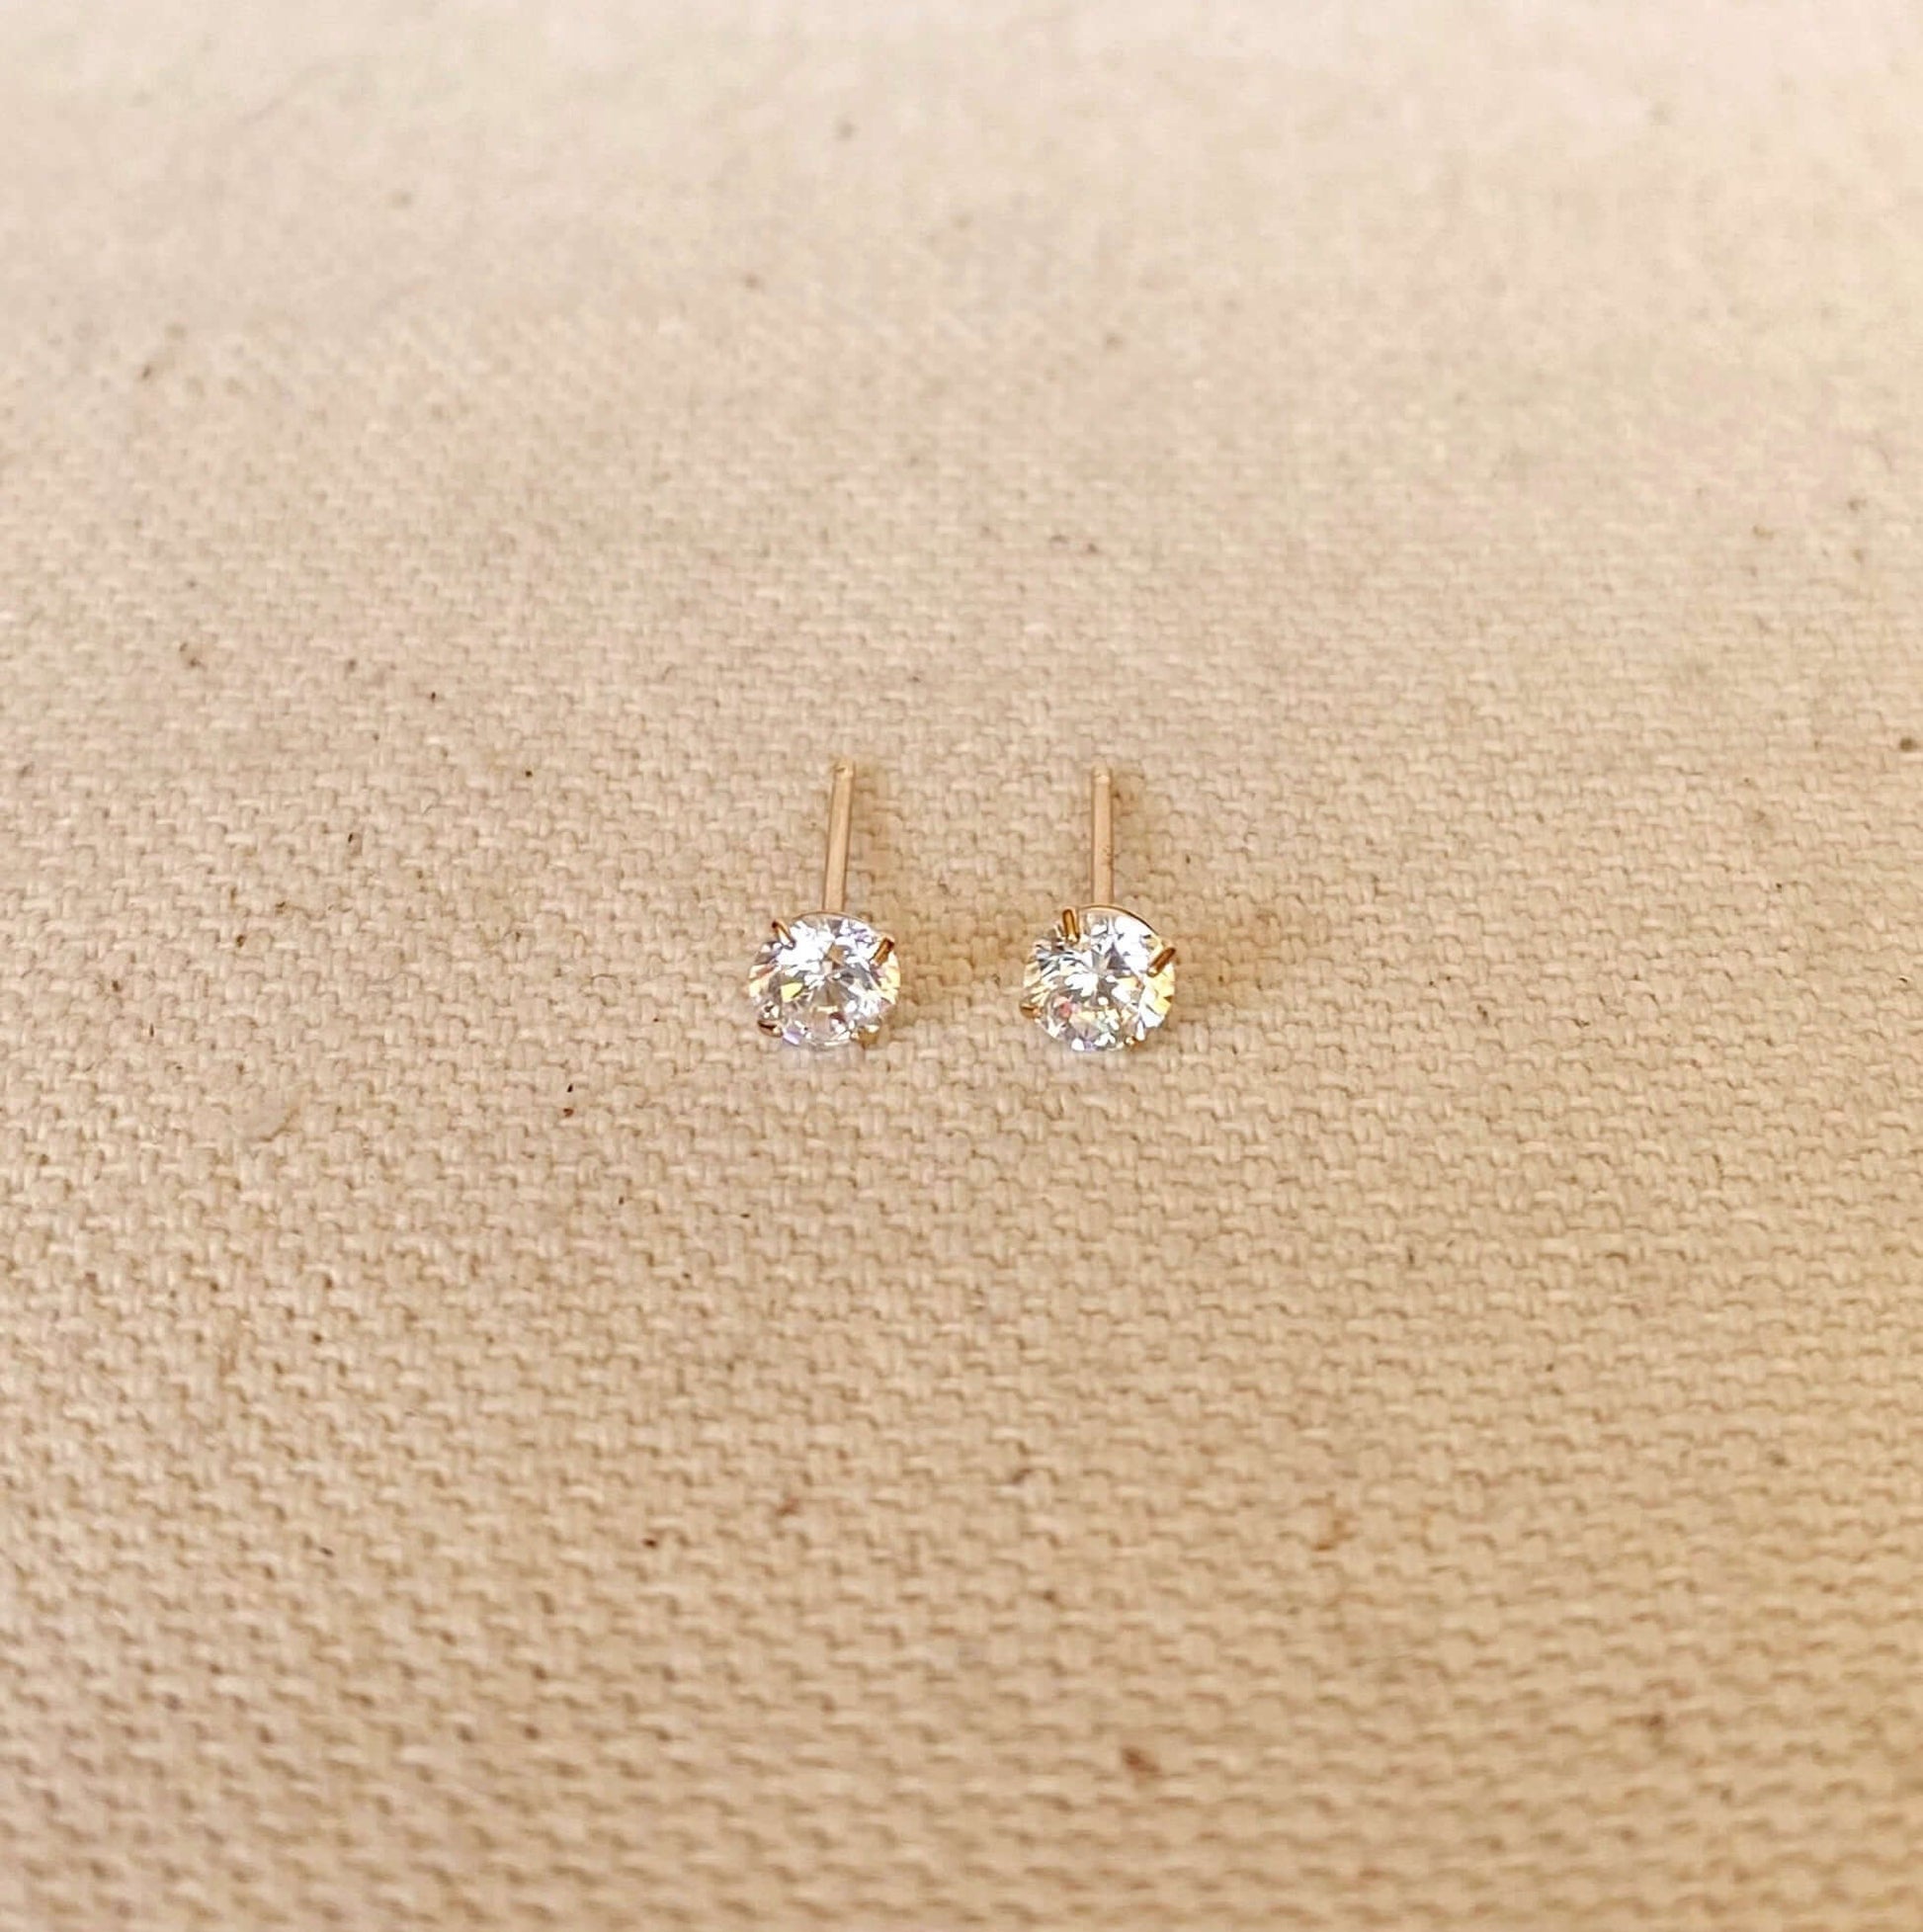 GoldFi 14k Solid Gold Round 4mm Cubic Zirconia Stud Earrings